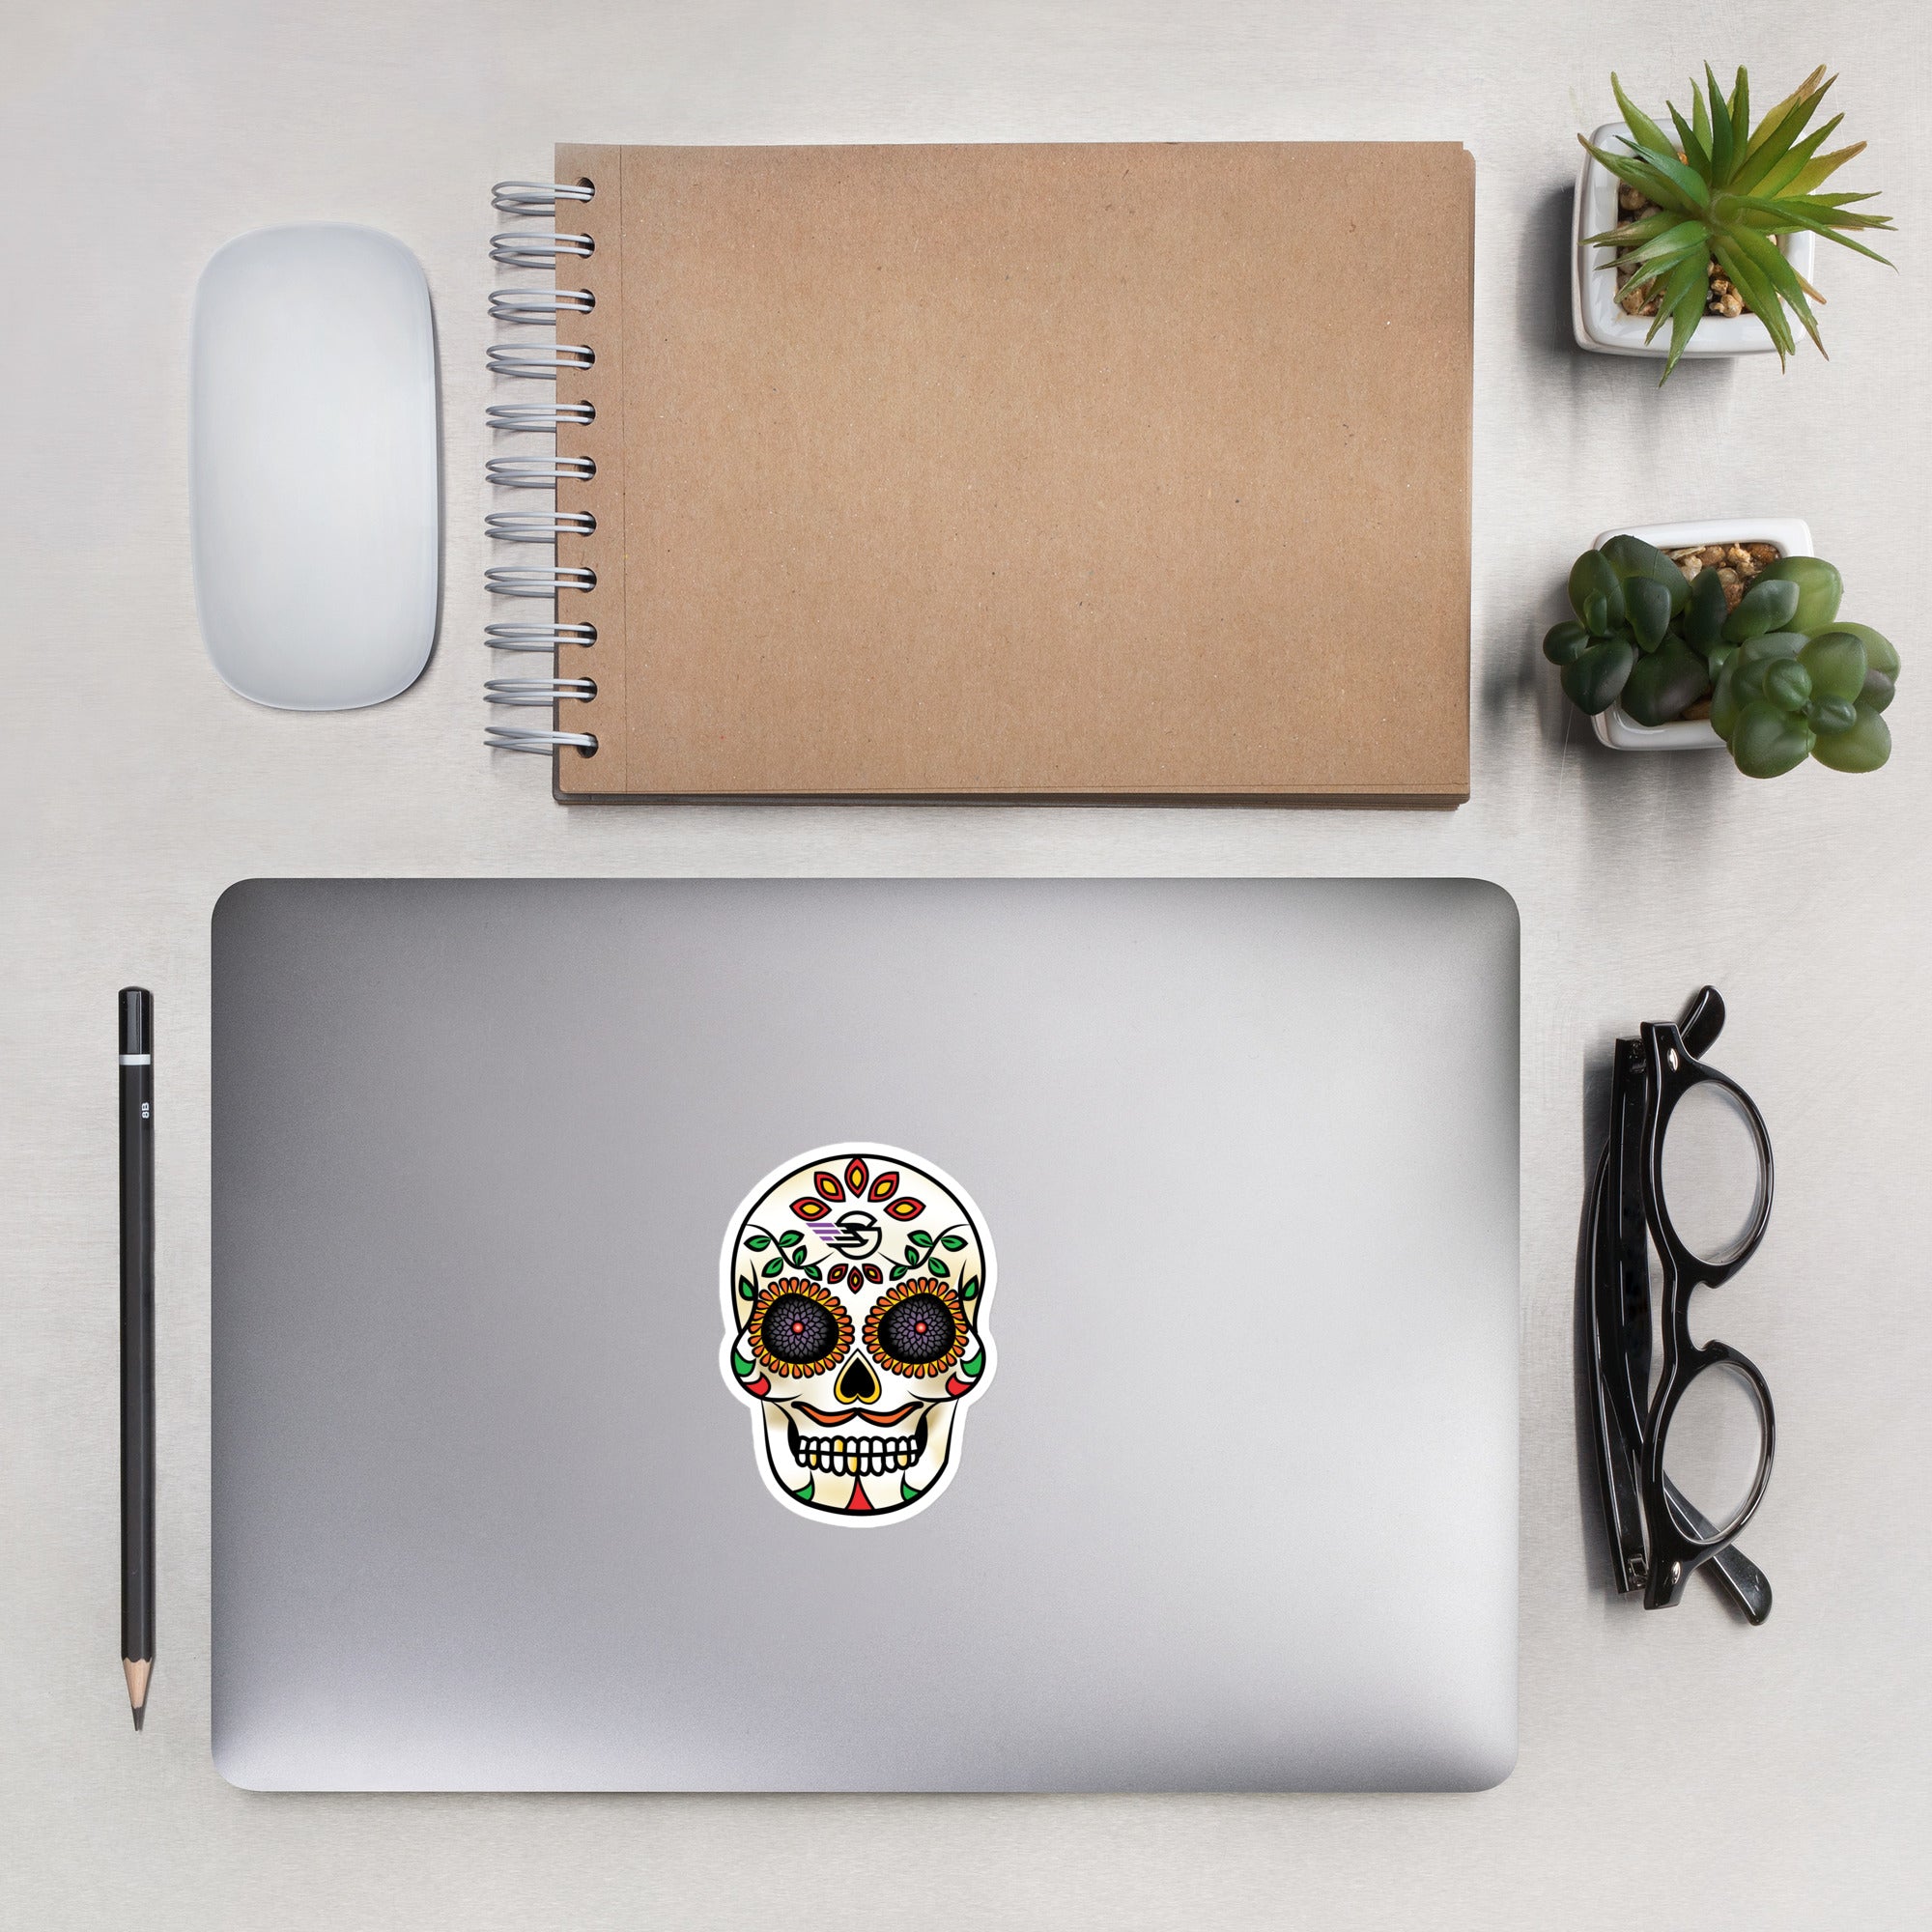 Gambyl Day of the Dead White Skull Bubble-free stickers